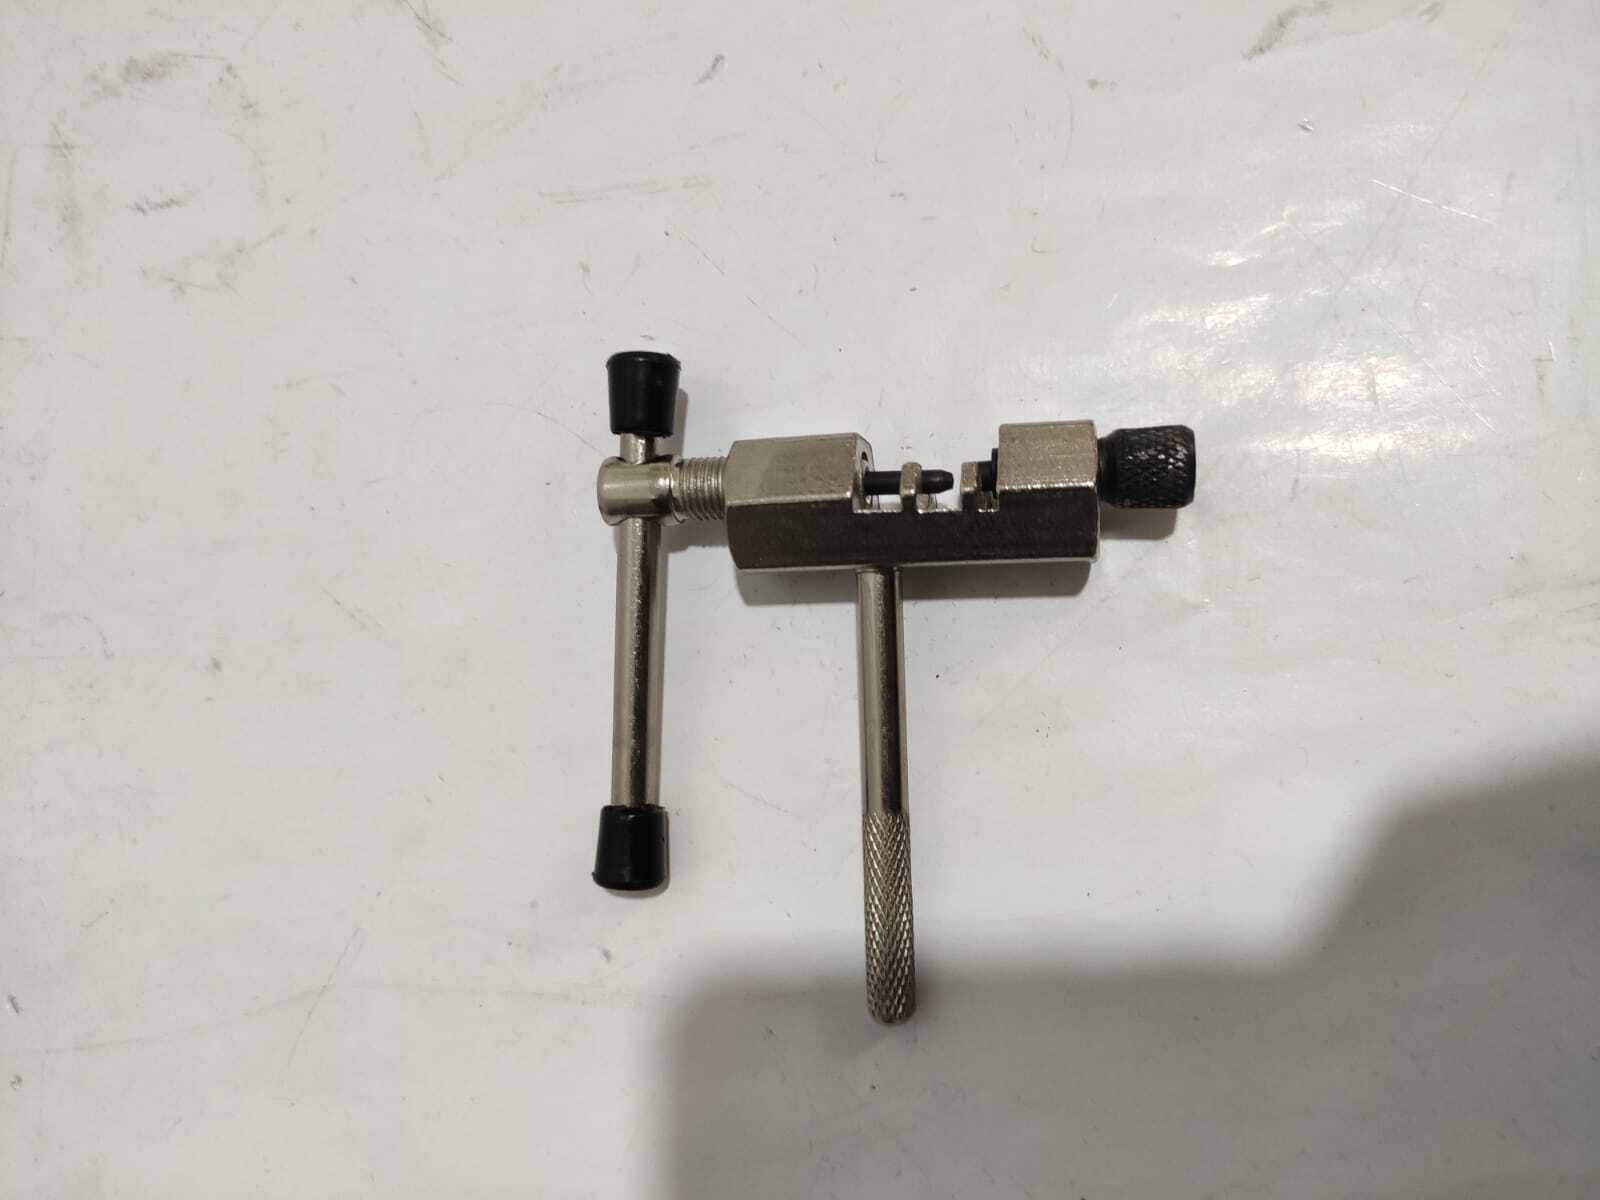 BICYCLE TOOL (CHAIN CUTTER )HEAVY